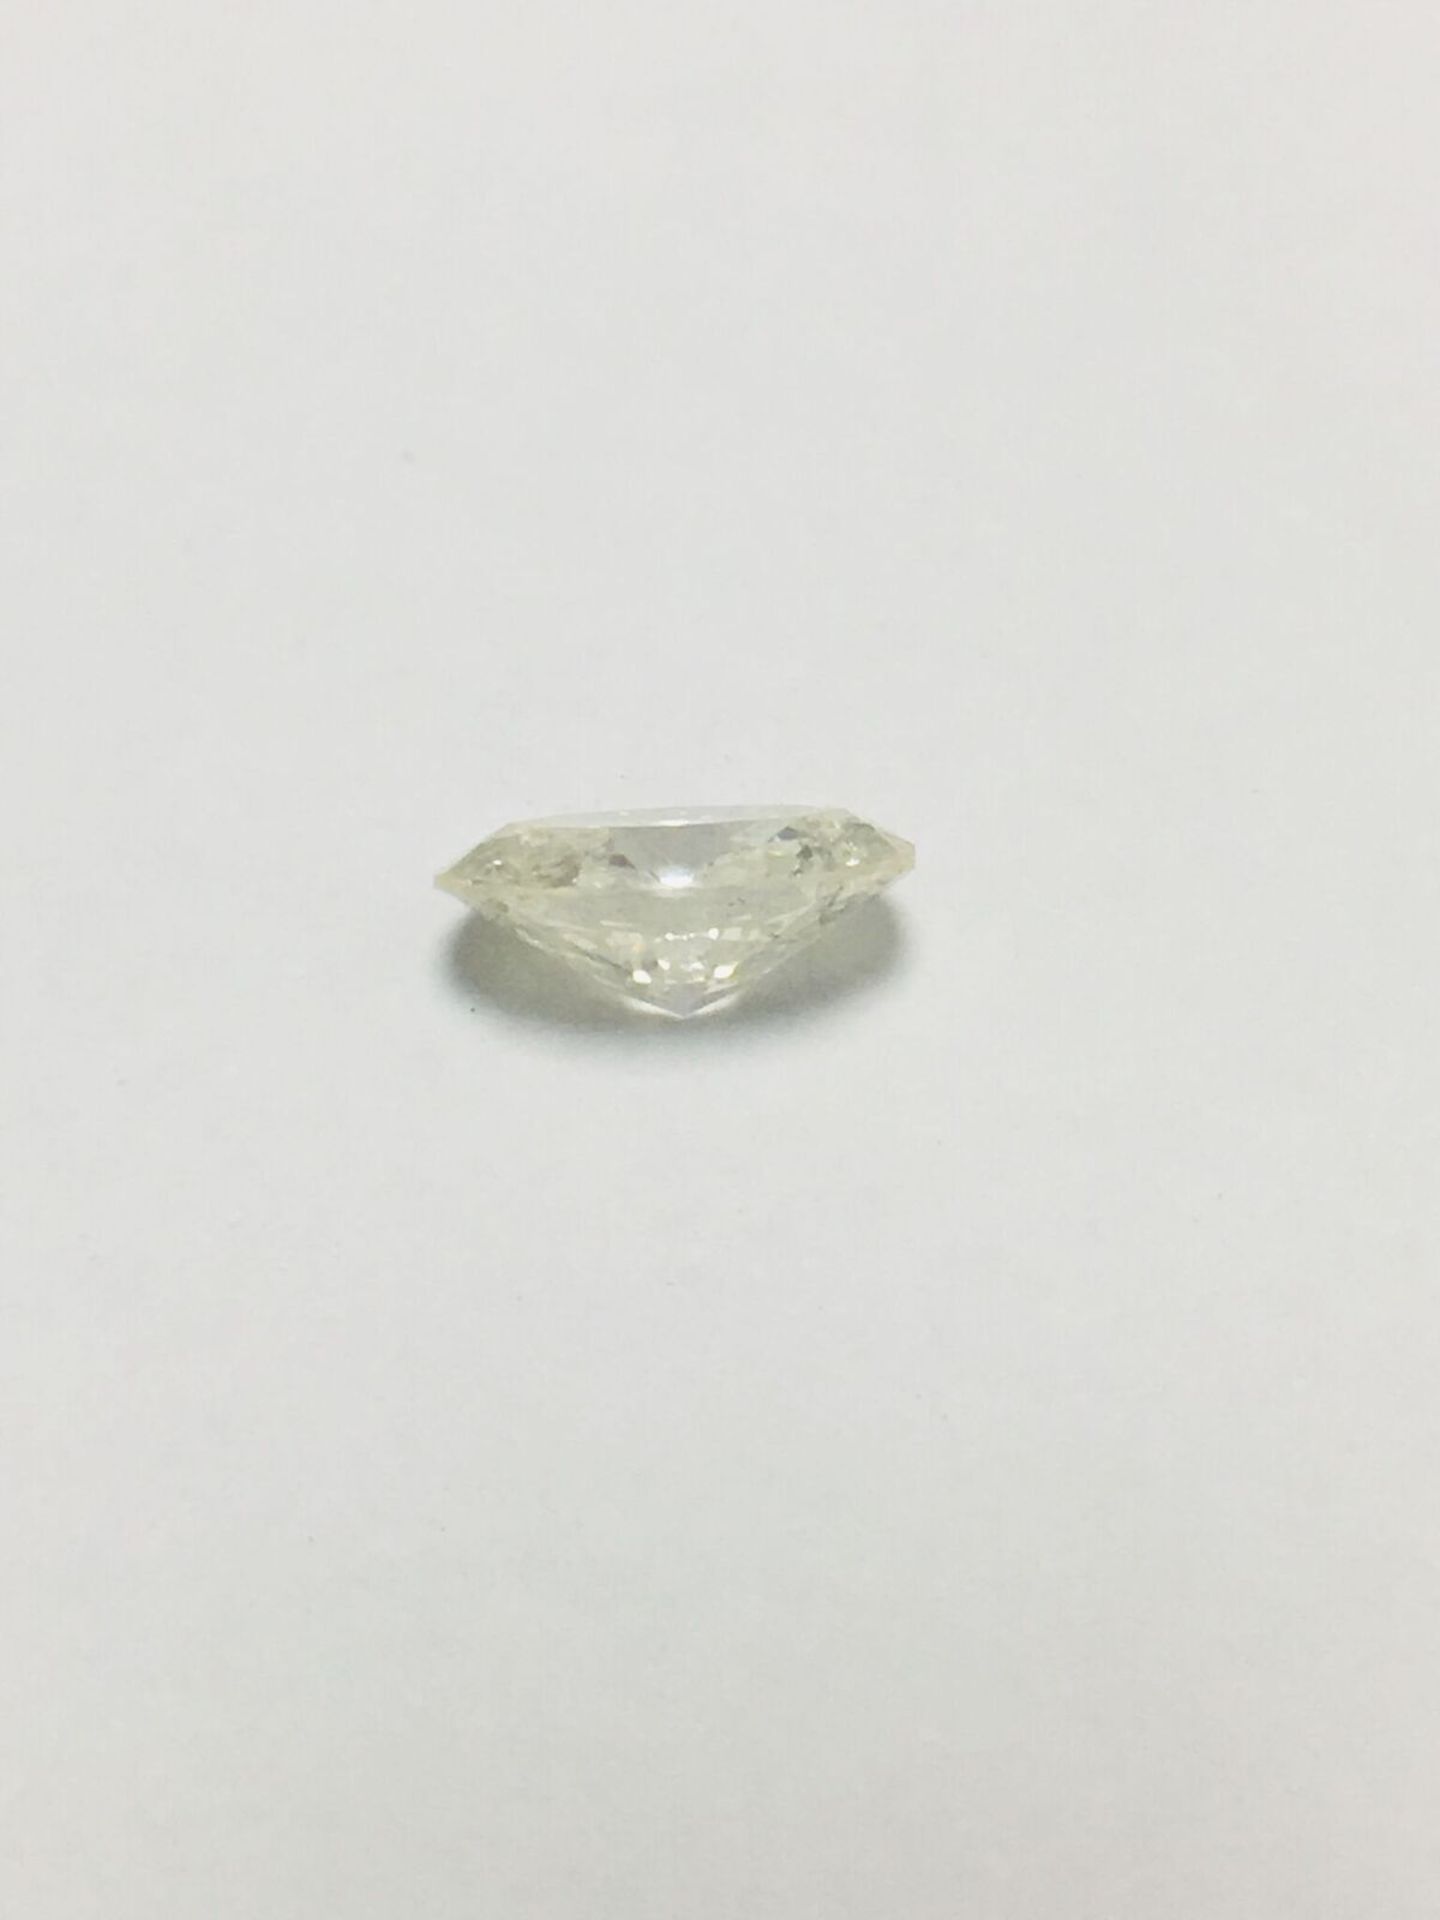 1.84Ct Natural Oval Cut Diamond - Image 4 of 4